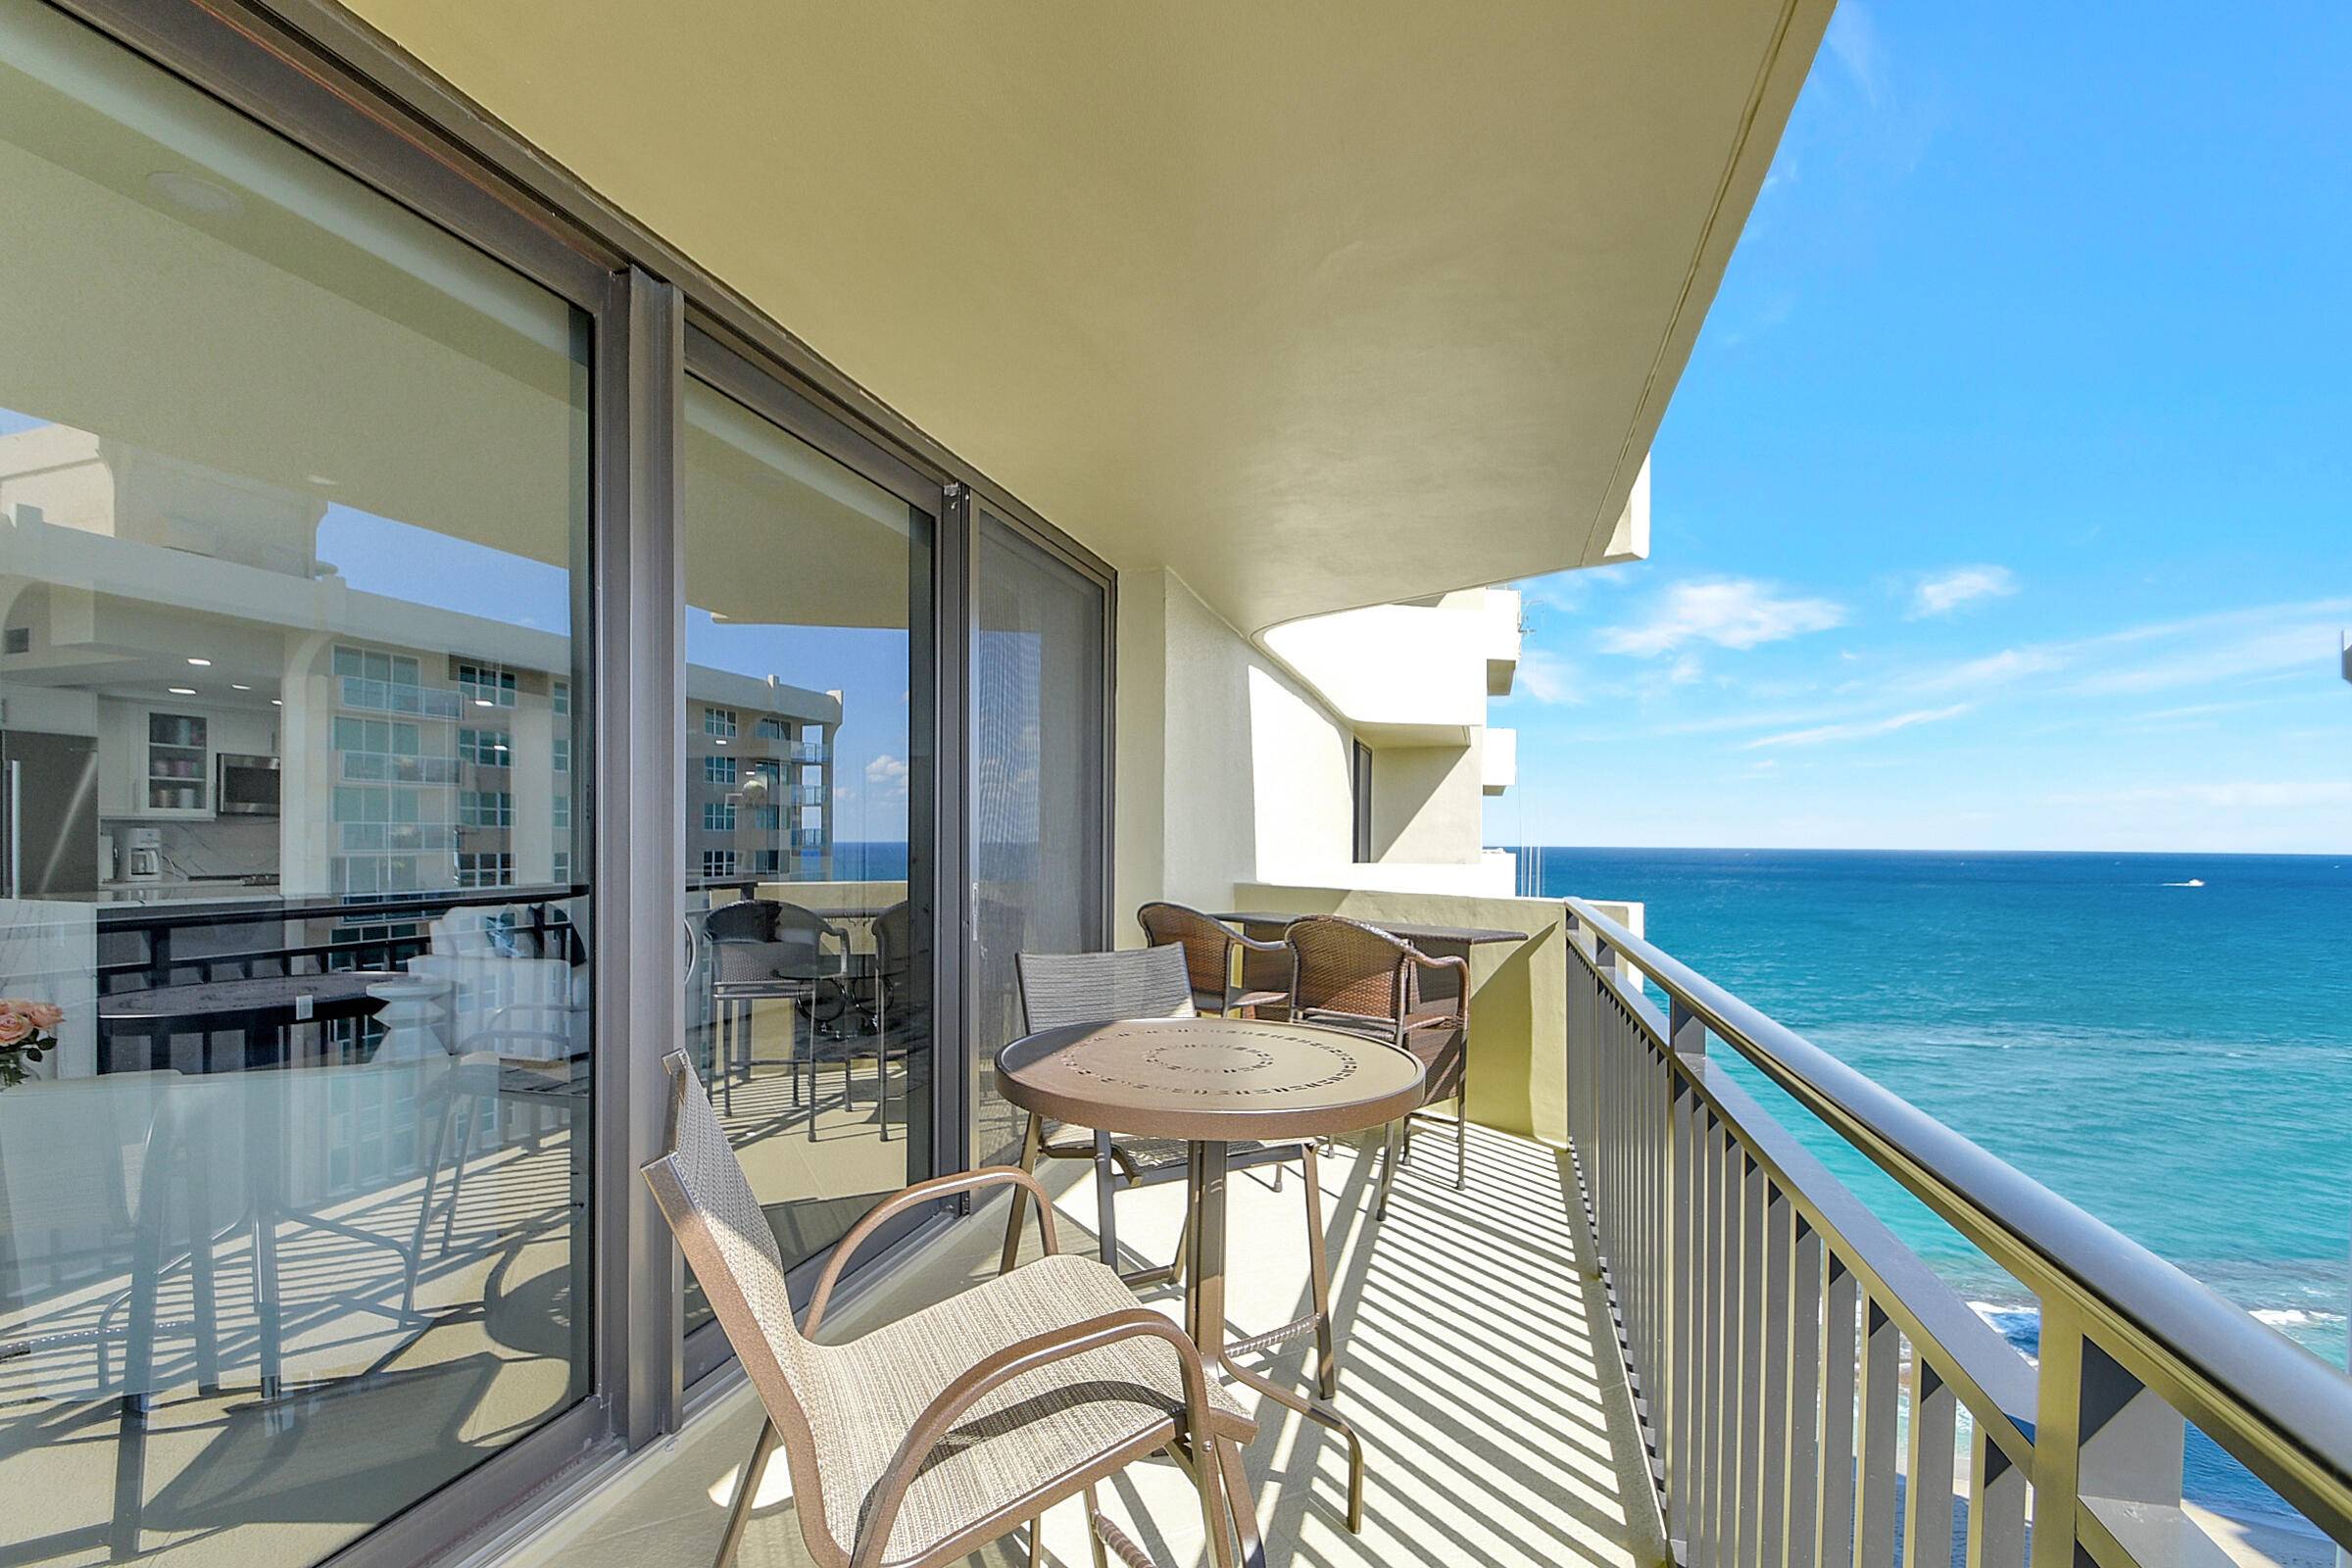 Enjoy this light and airy condo with wide open beautiful views of the Intracoastal Waterway and the Atlantic Ocean.